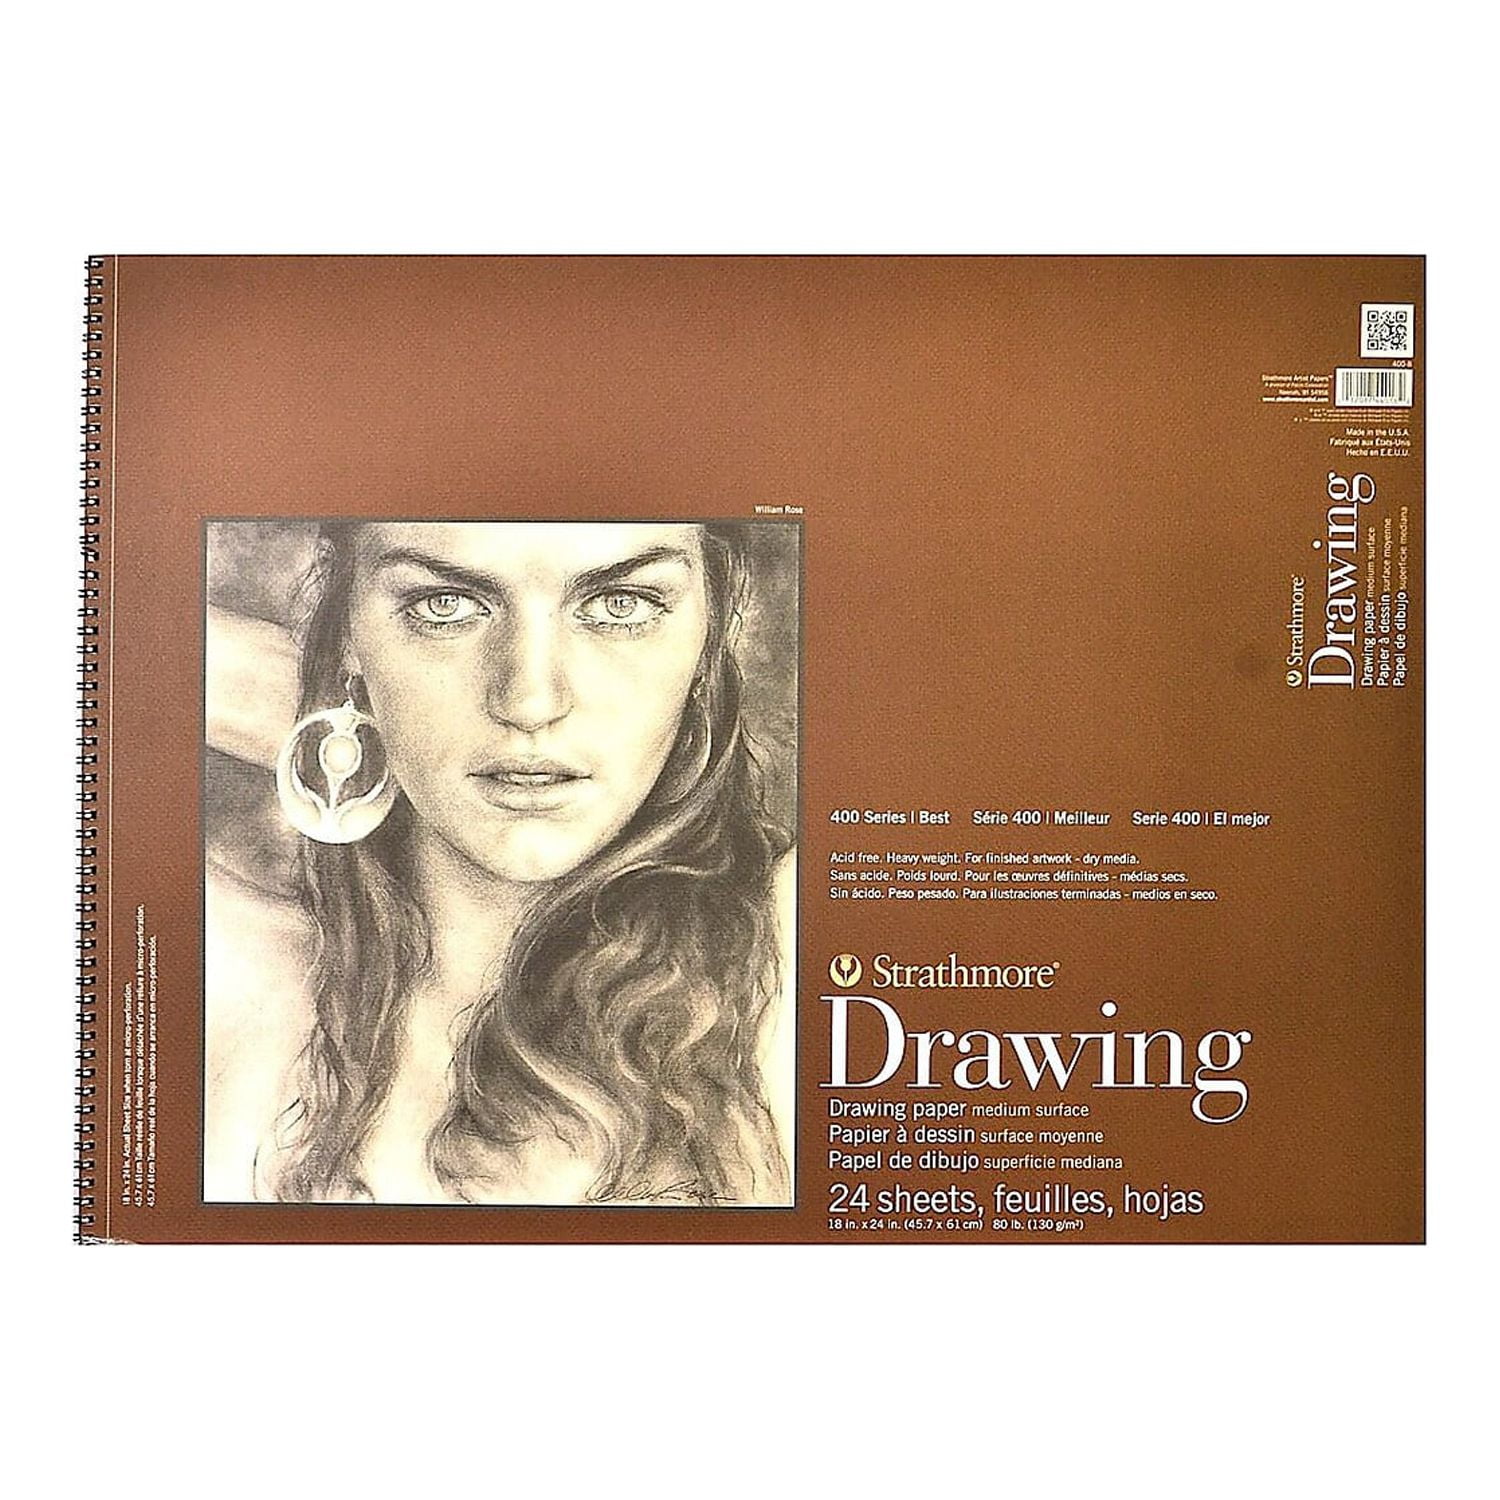 Strathmore 400 Series Sketch Pad, 5.5x8.5 inch, 100 Sheets - Artist  Sketchbook for Drawing, Illustration, Art Class Students